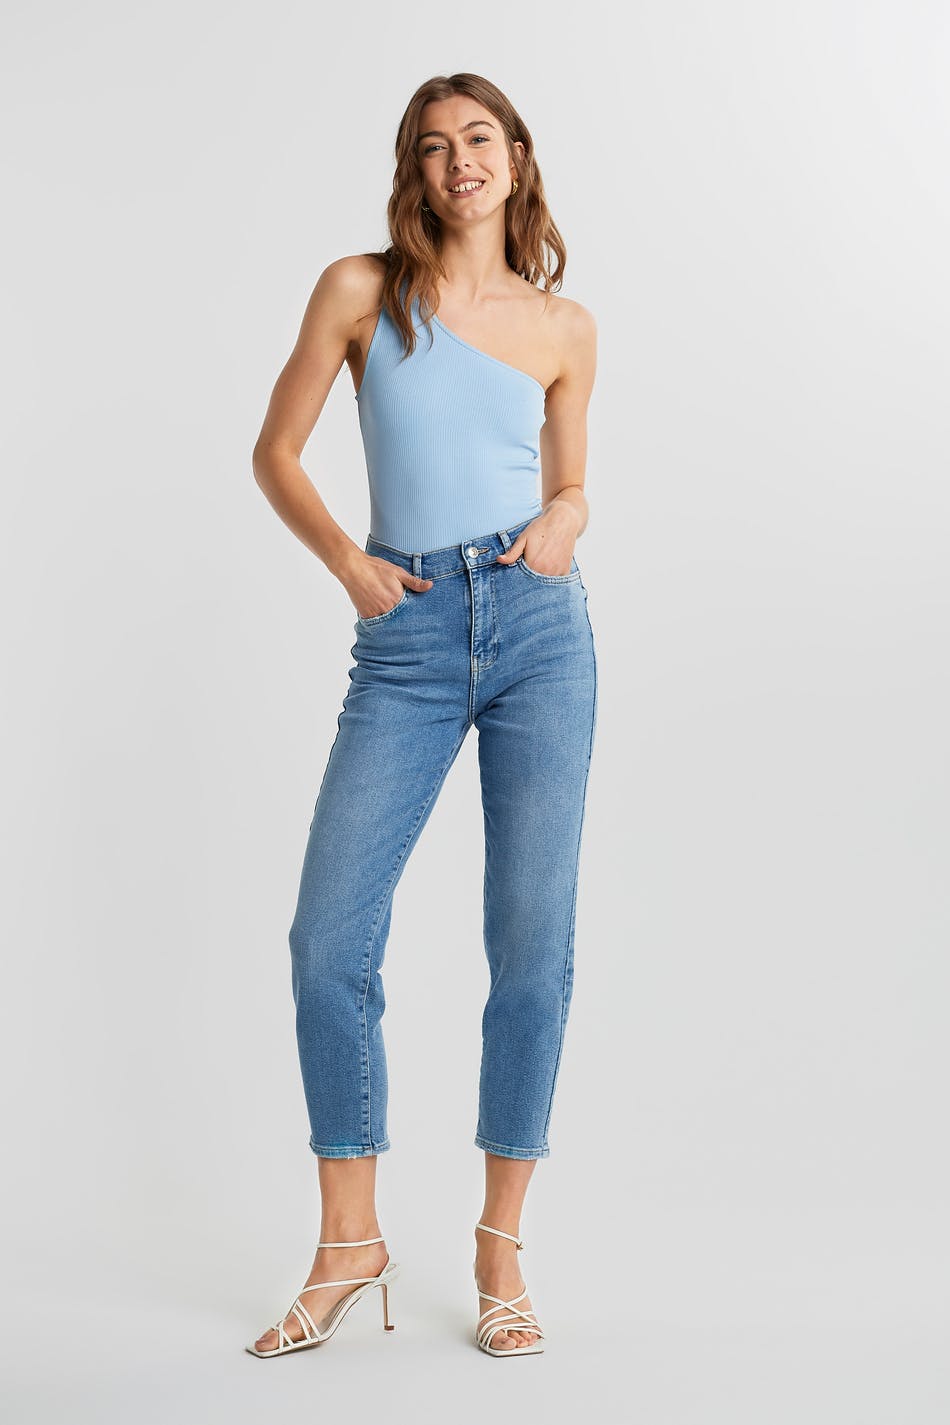 Comfy mom jeans